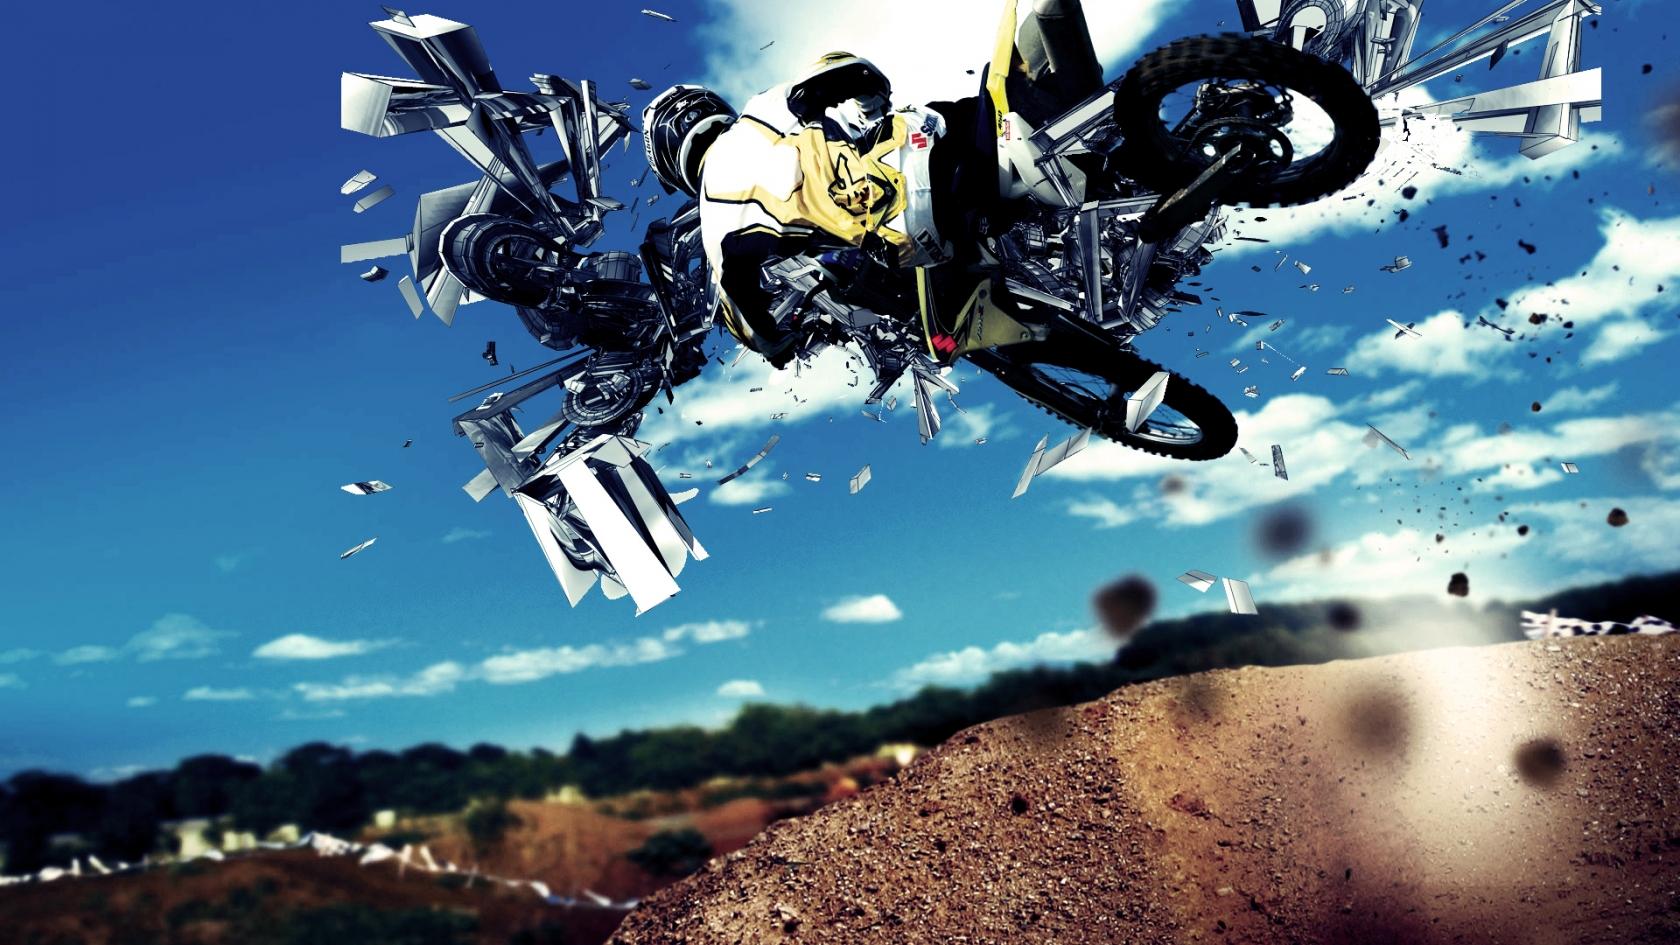 Motorcycle Race for 1680 x 945 HDTV resolution